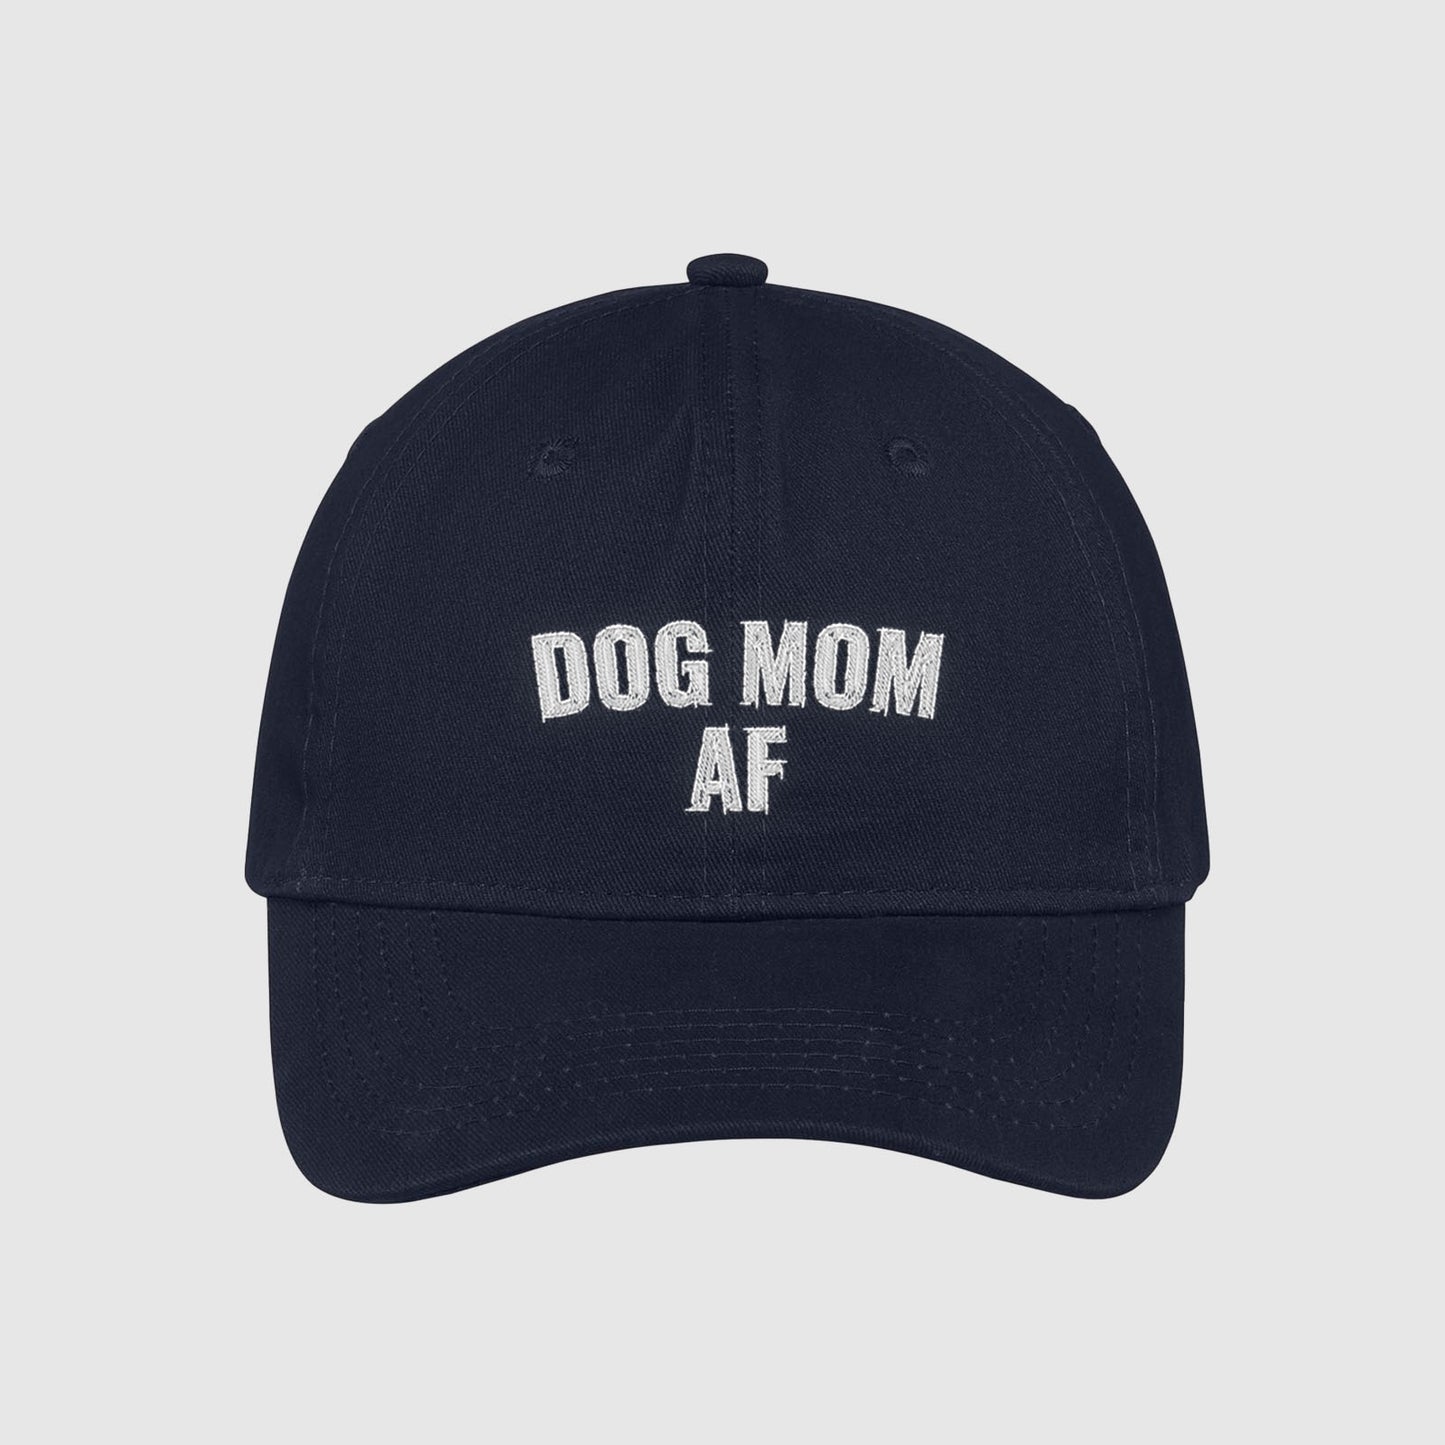 Navy Dog Mom AF Hat embroidered with white text.